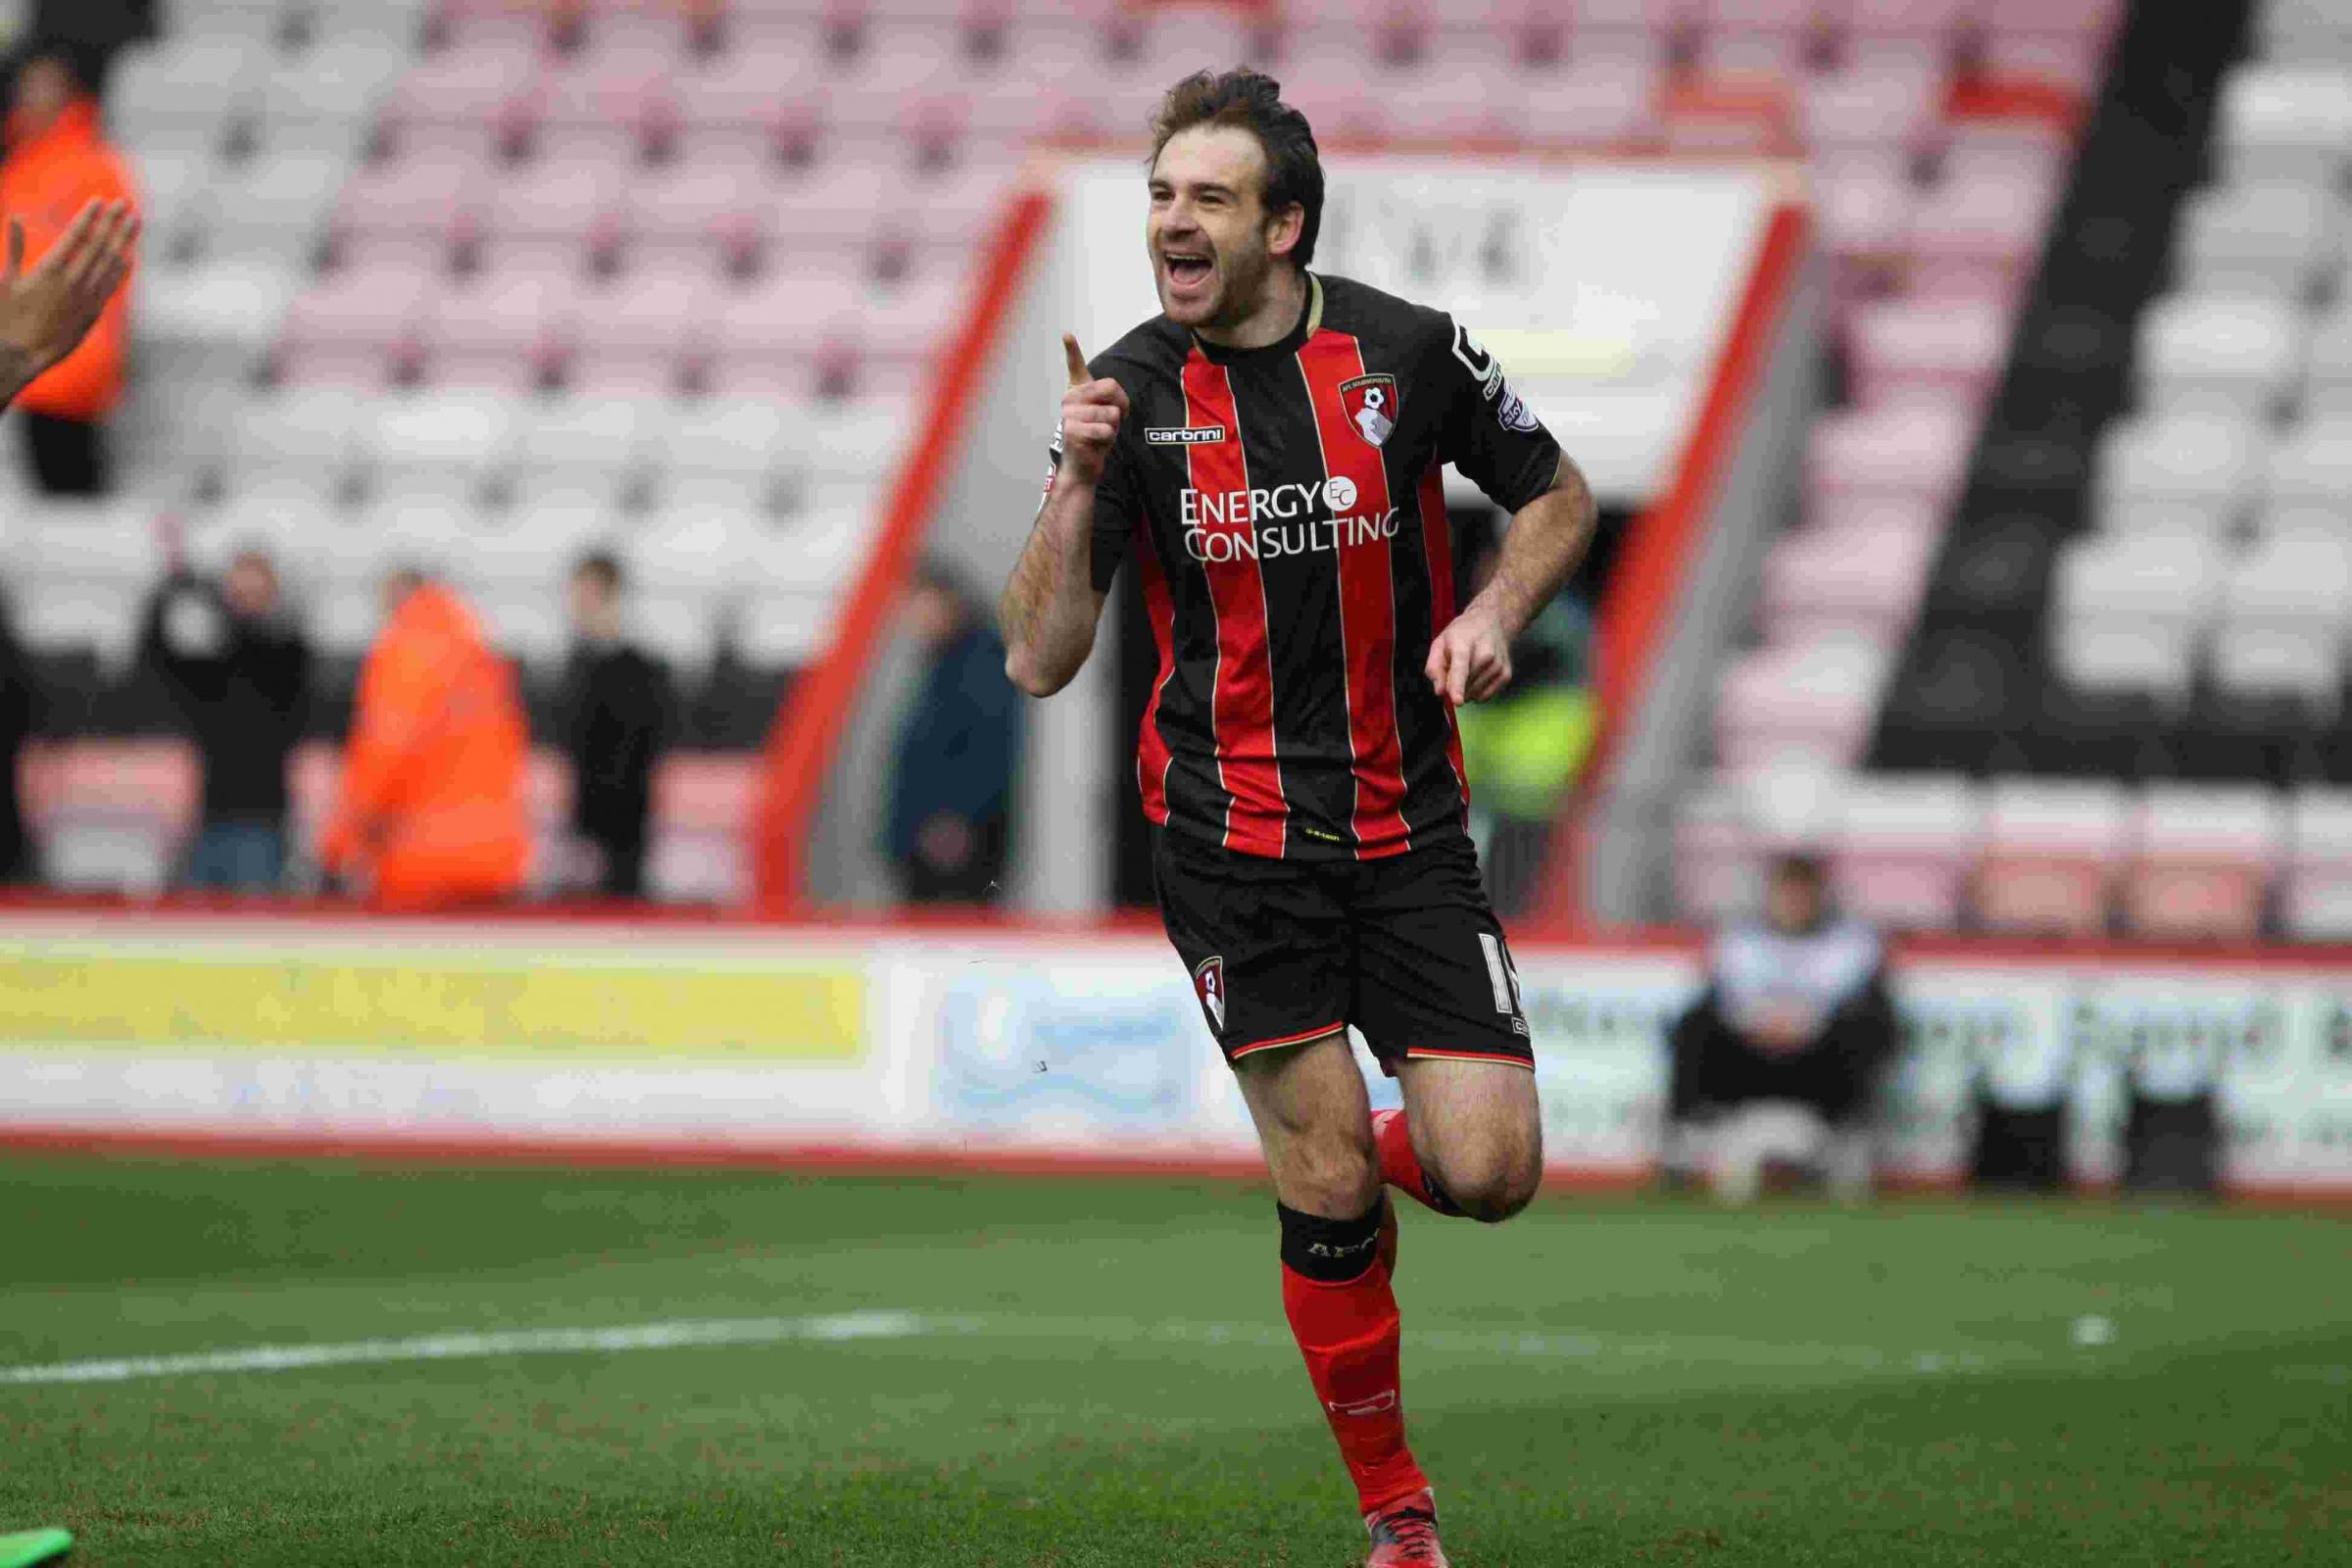 Cherries hero Pitman in talks with Wessex Premier side after Bristol Rovers release